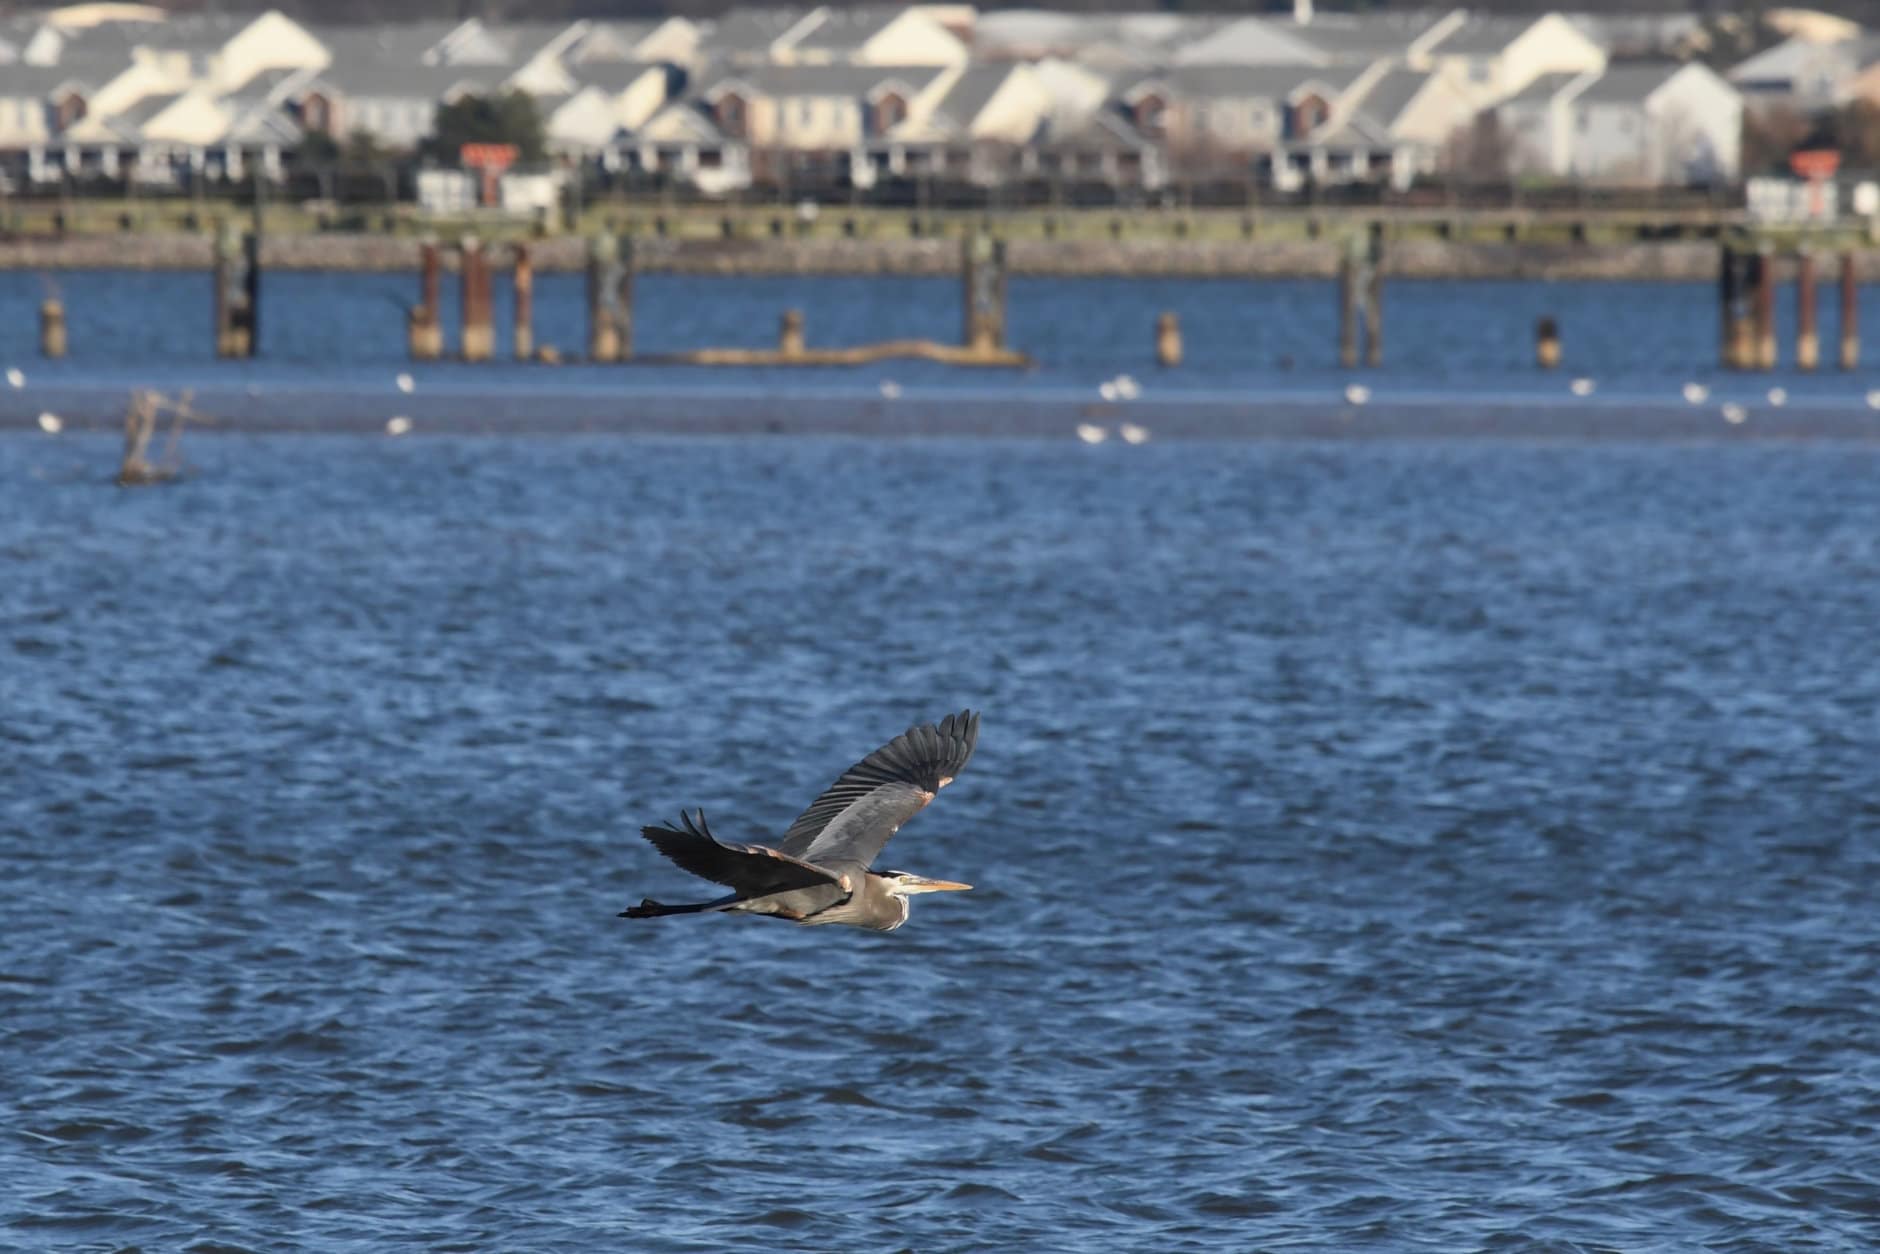 A Great Blue Heron on the Potomac River. The Chesapeake Bay maintained a C rating in the category of wetland where herons hunt in the 2018 State of the Bay report. (WTOP/Kate Ryan)